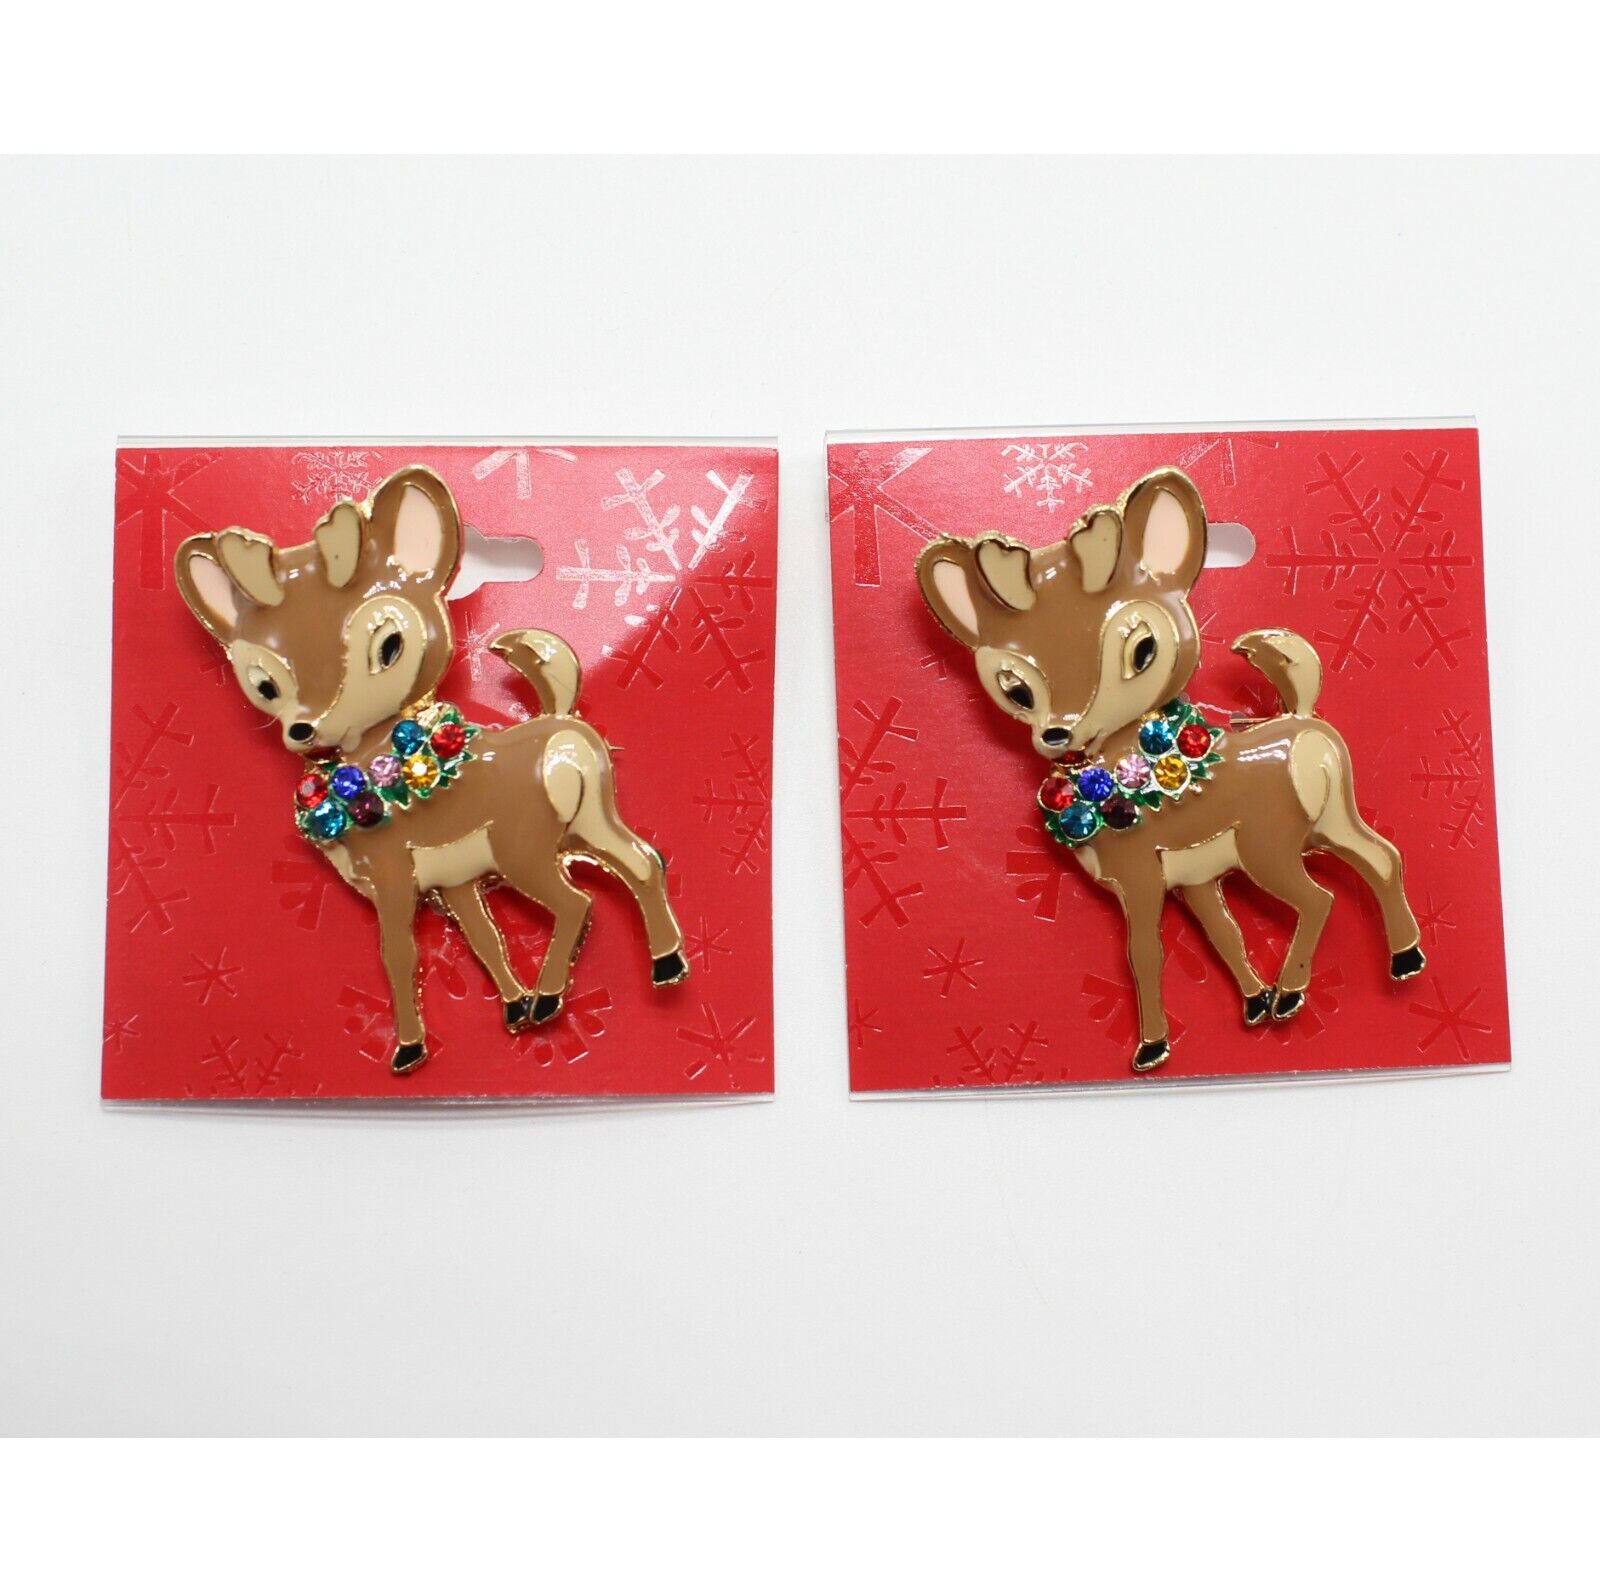 Two New Christmas Holiday Reindeer Brooch Pins with Rhinestones Holiday Traditions